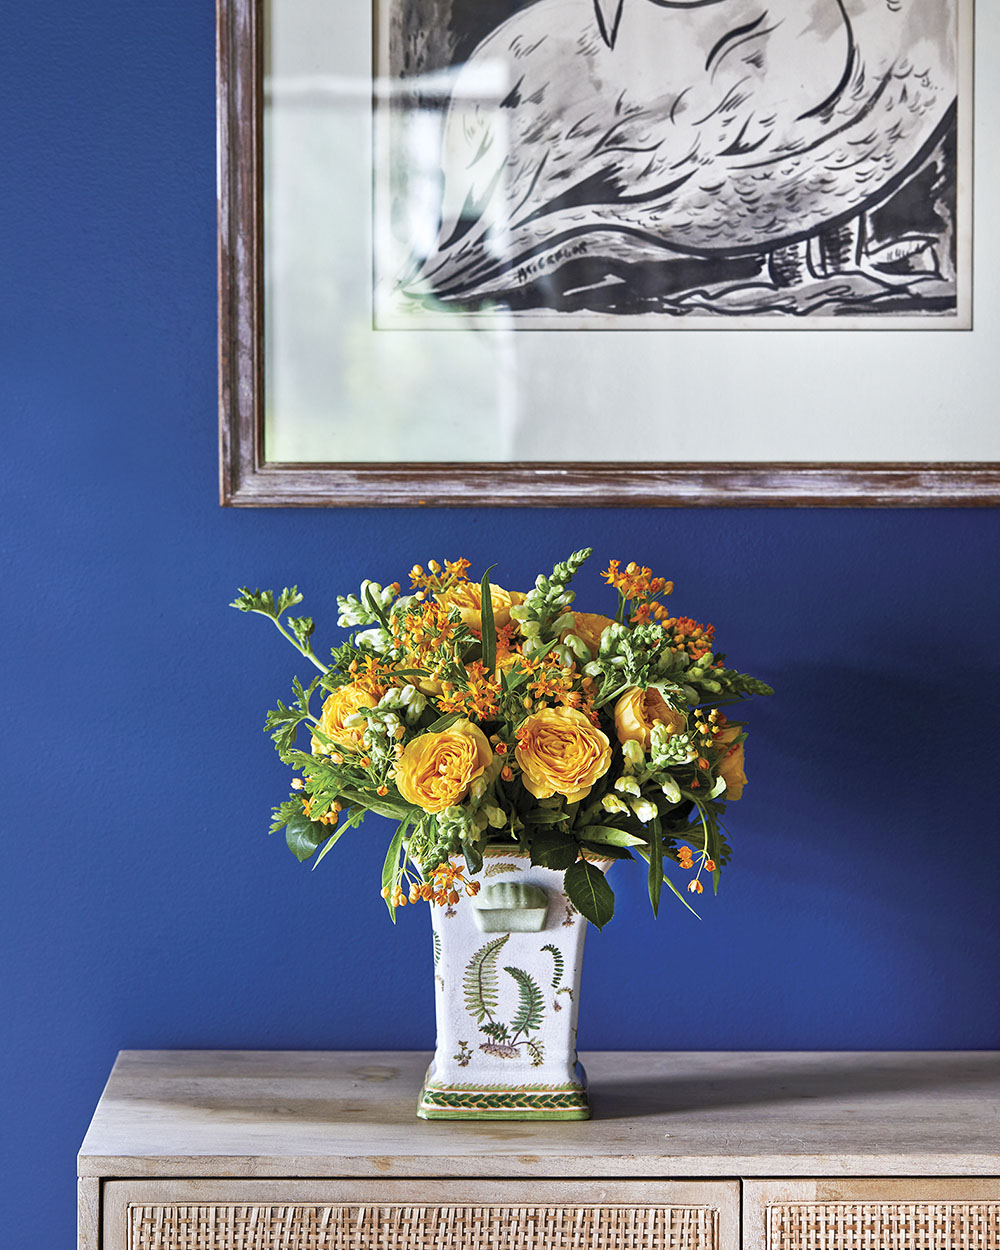 A vibrant yellow floral arrangement of dianthus, roses, snapdragons, scented geranium, and asclepia (milkweed) contrasts with the royal blue wall.